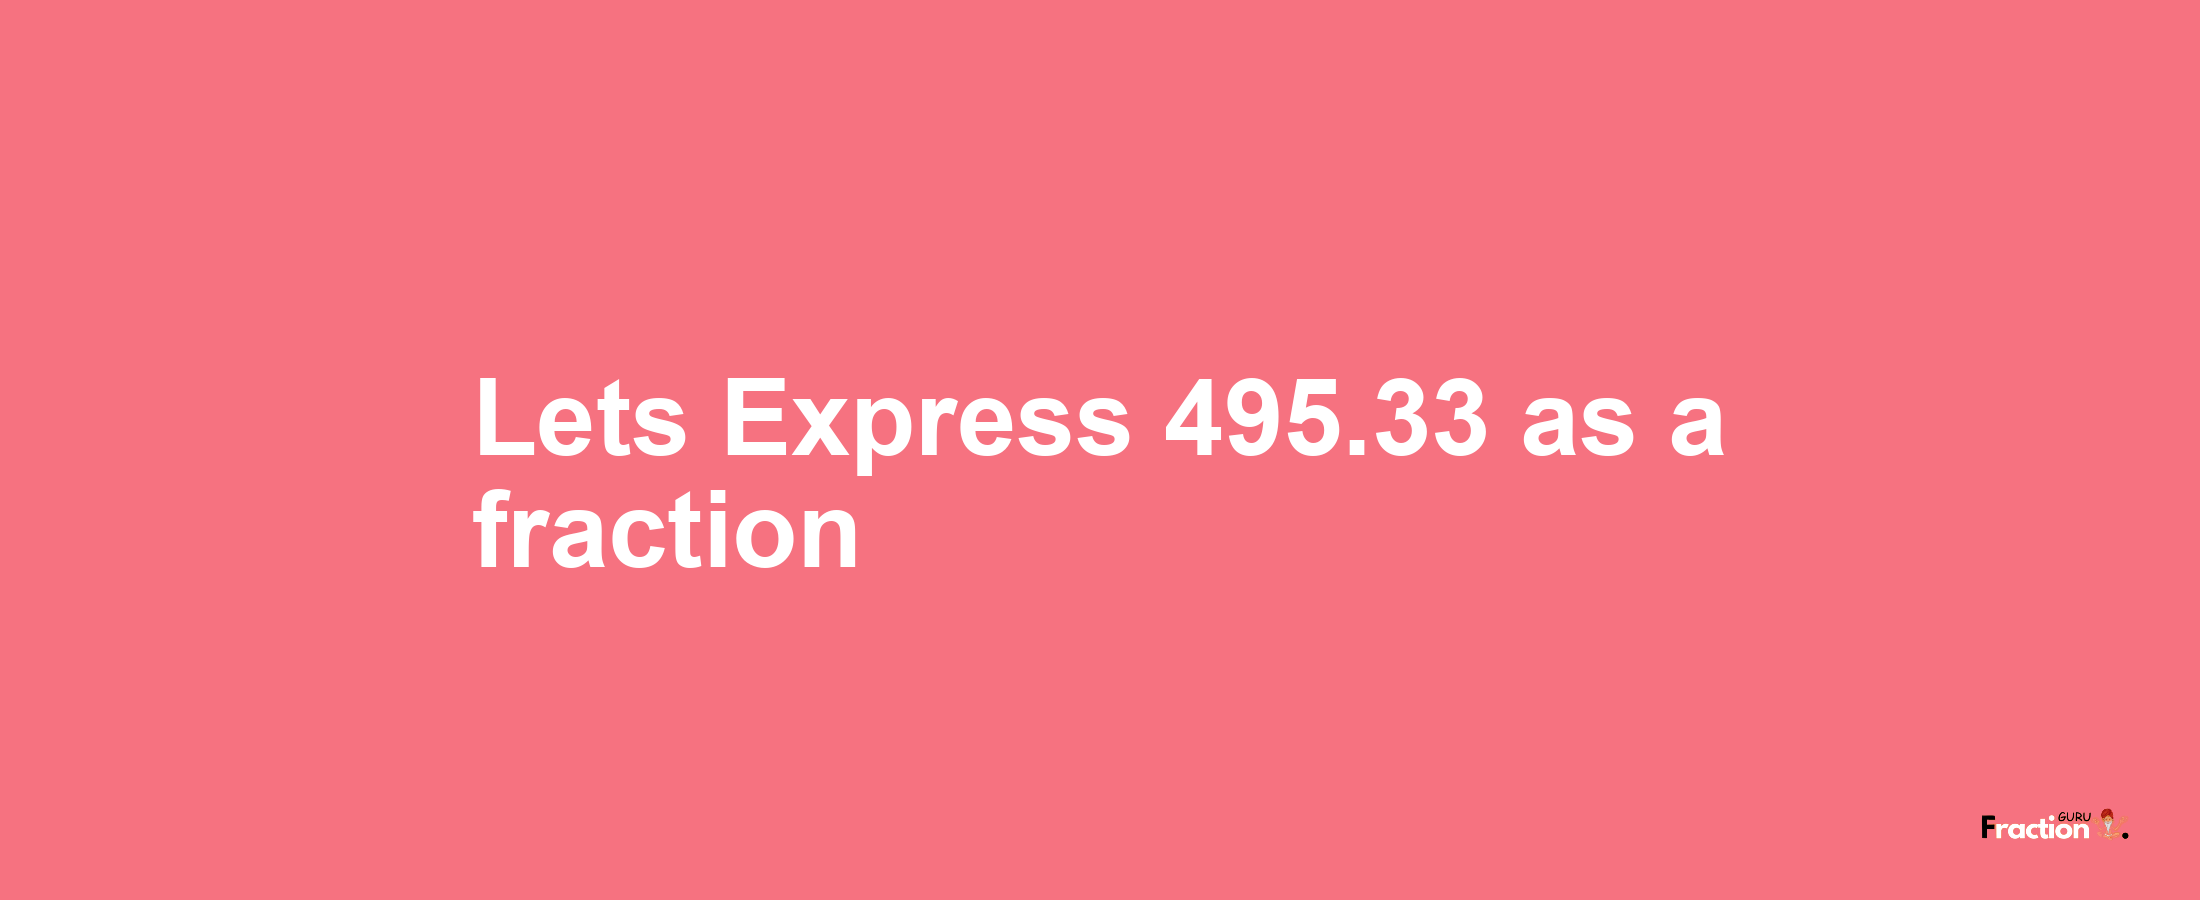 Lets Express 495.33 as afraction